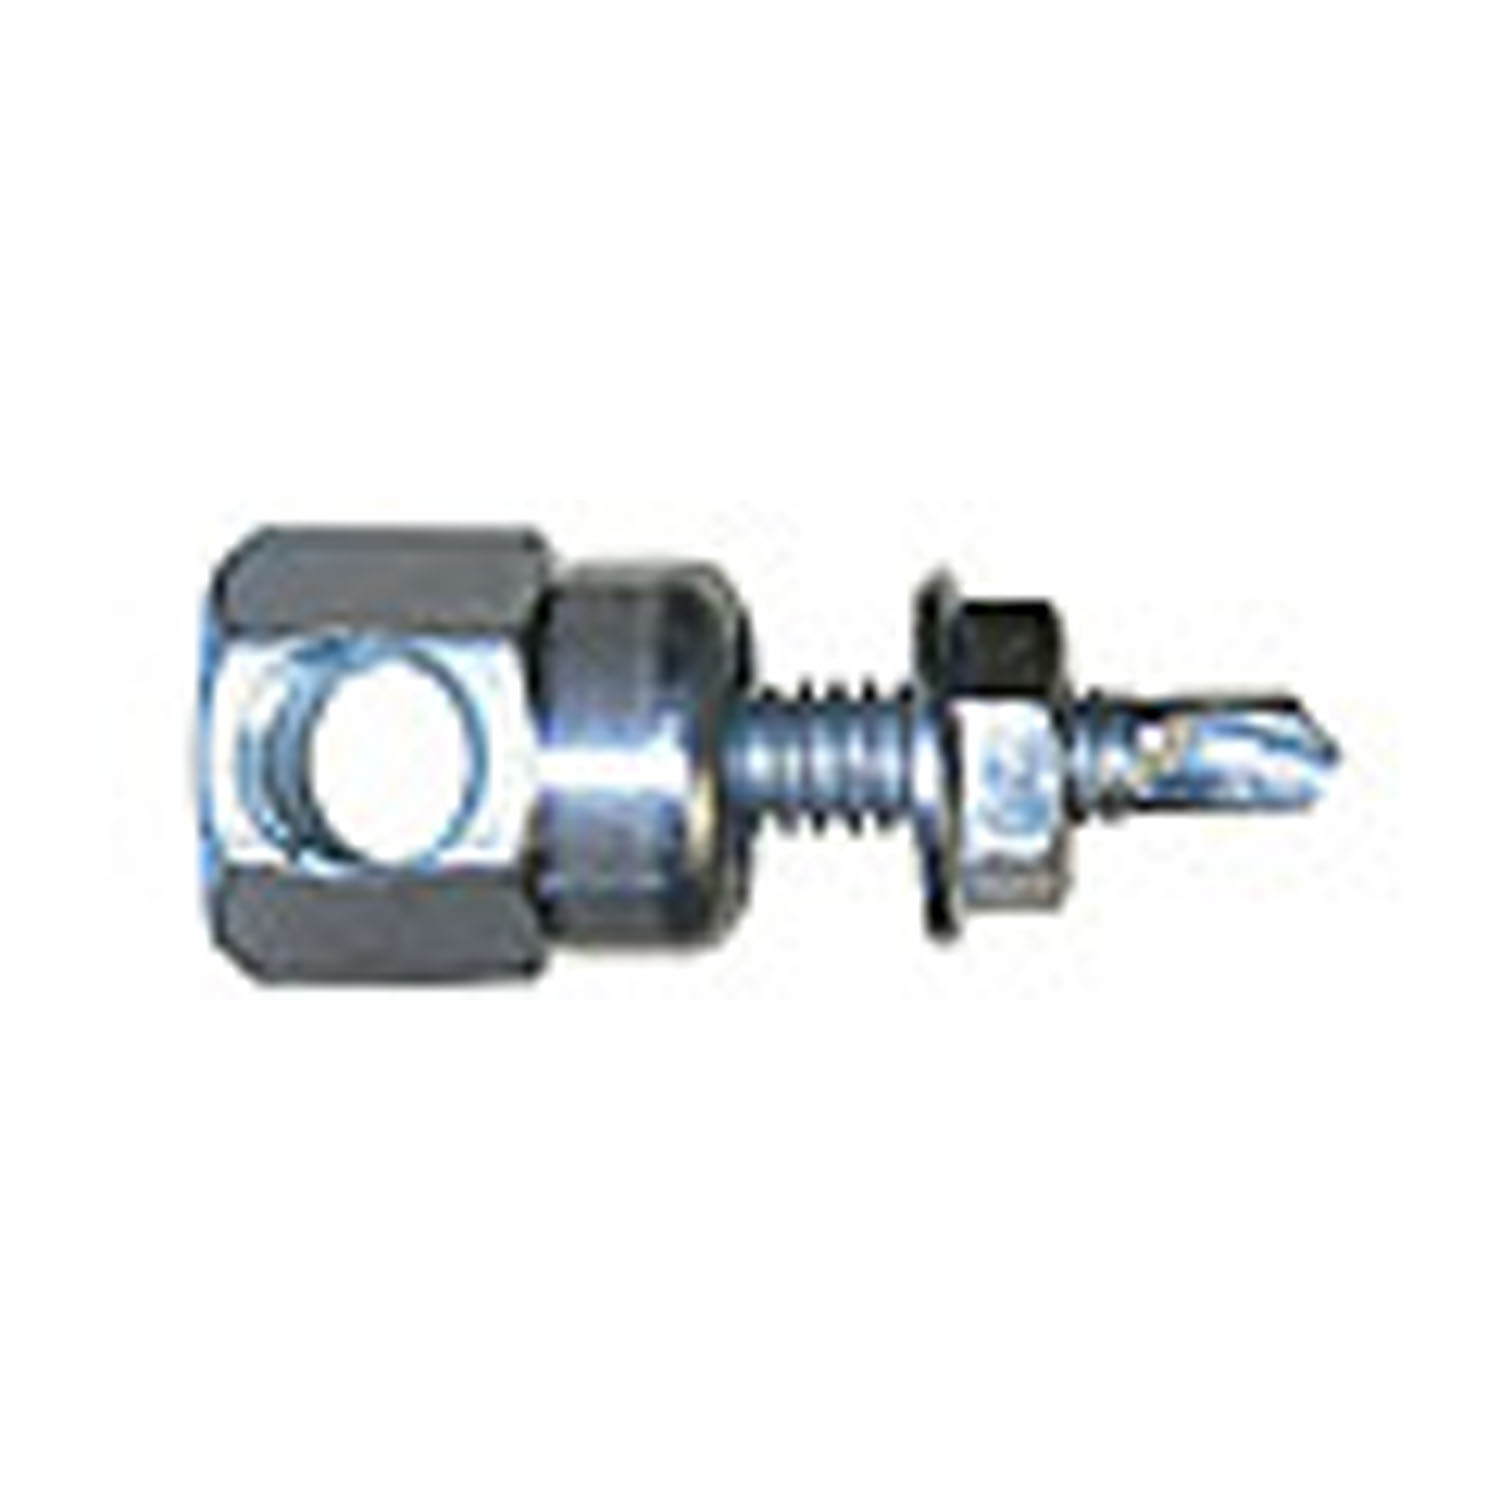 5/16 X 1.25 IN. SWDR 1 SAMMY 3/8 IN. HORIZONTAL THREADED ROD ANCHOR FOR STEEL